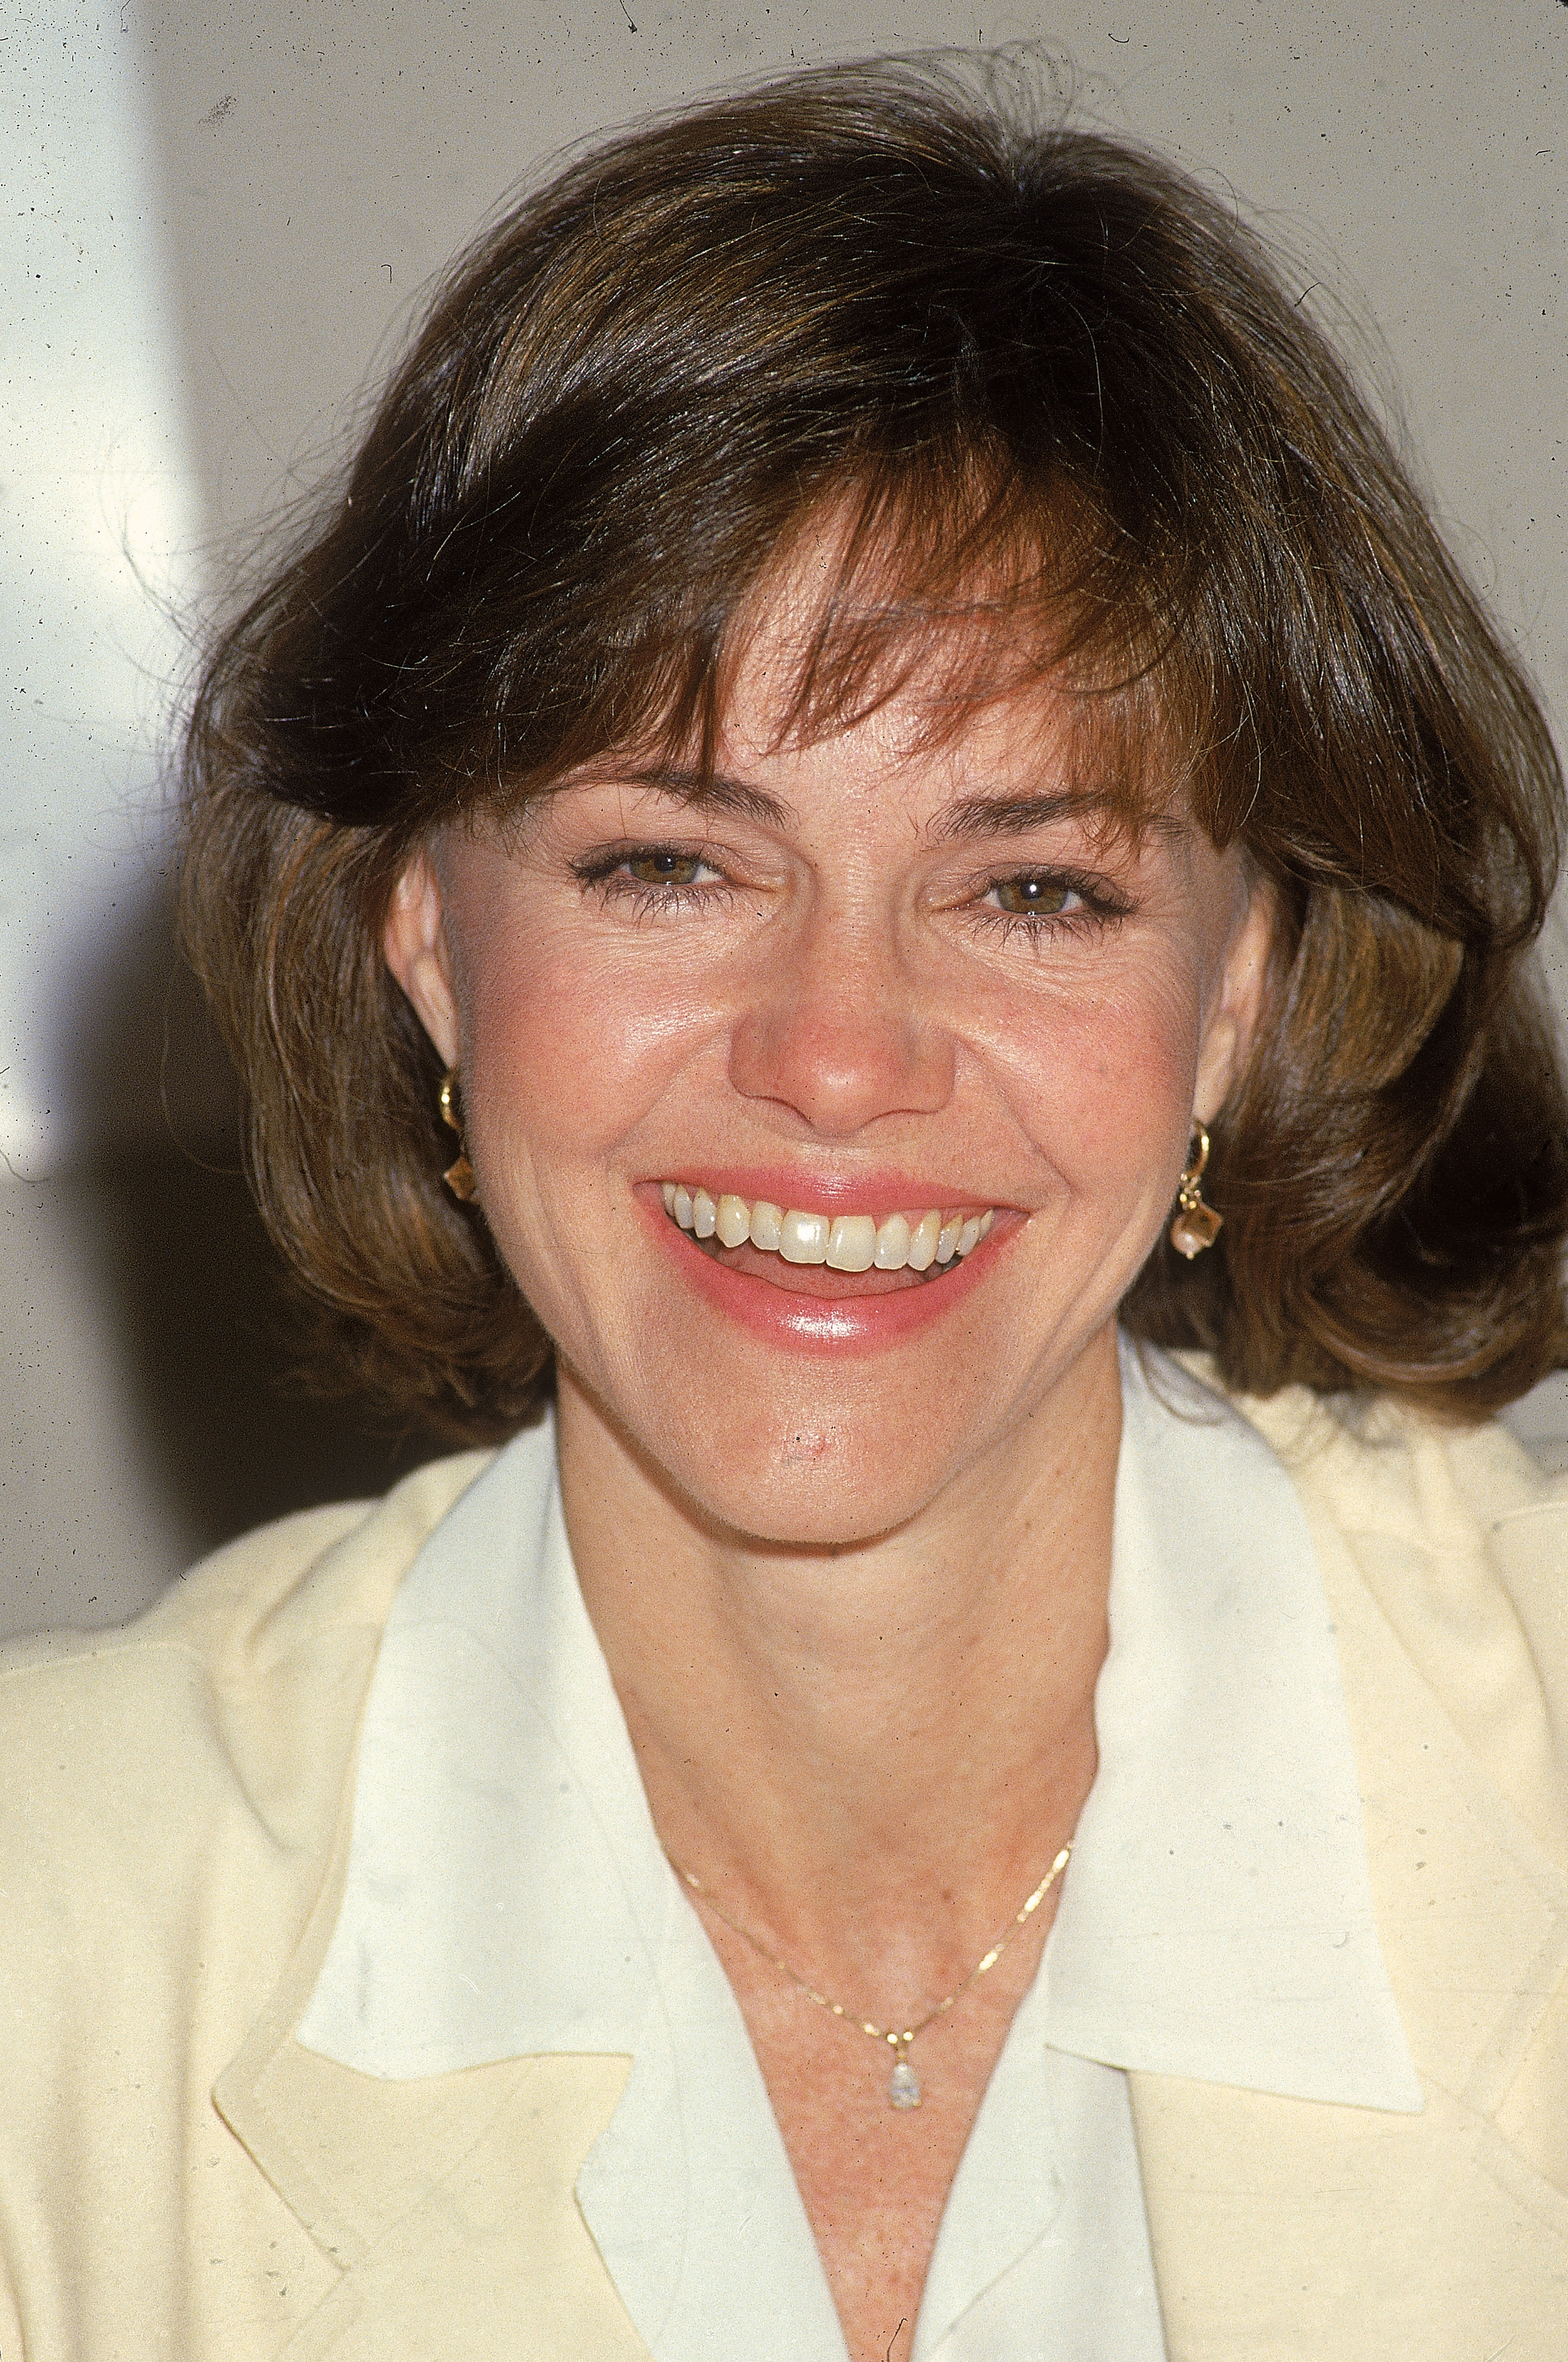 Sally Field laughing while posing for a headshot, circa 1991 | Source: Getty Images